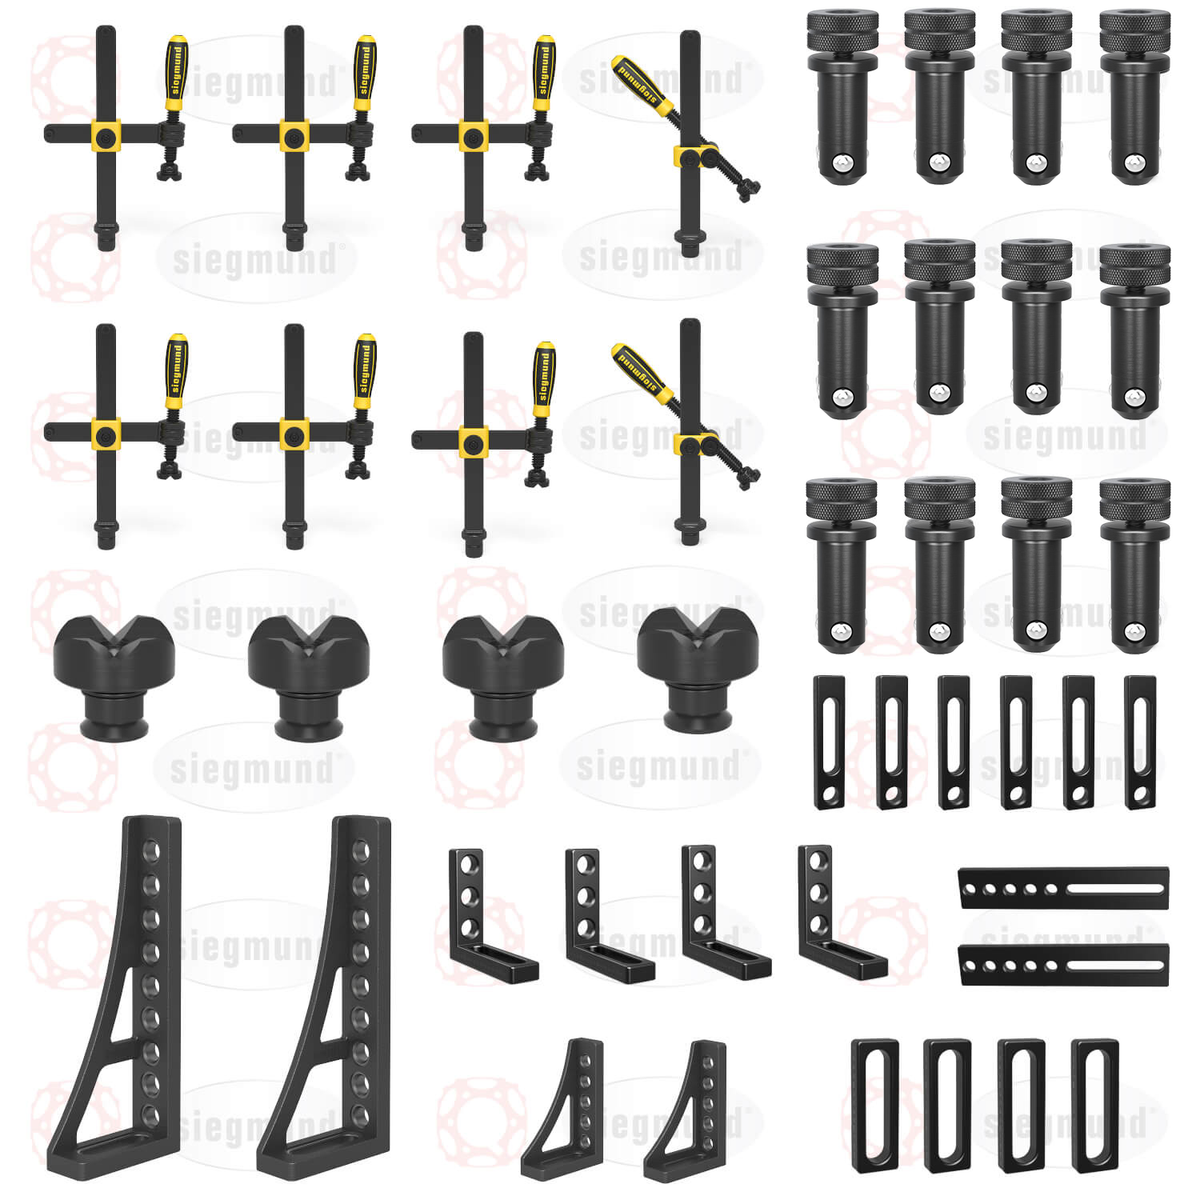 US283200: Set 2, 50 Piece Accessory Kit for the System 28 Imperial Series Welding Tables